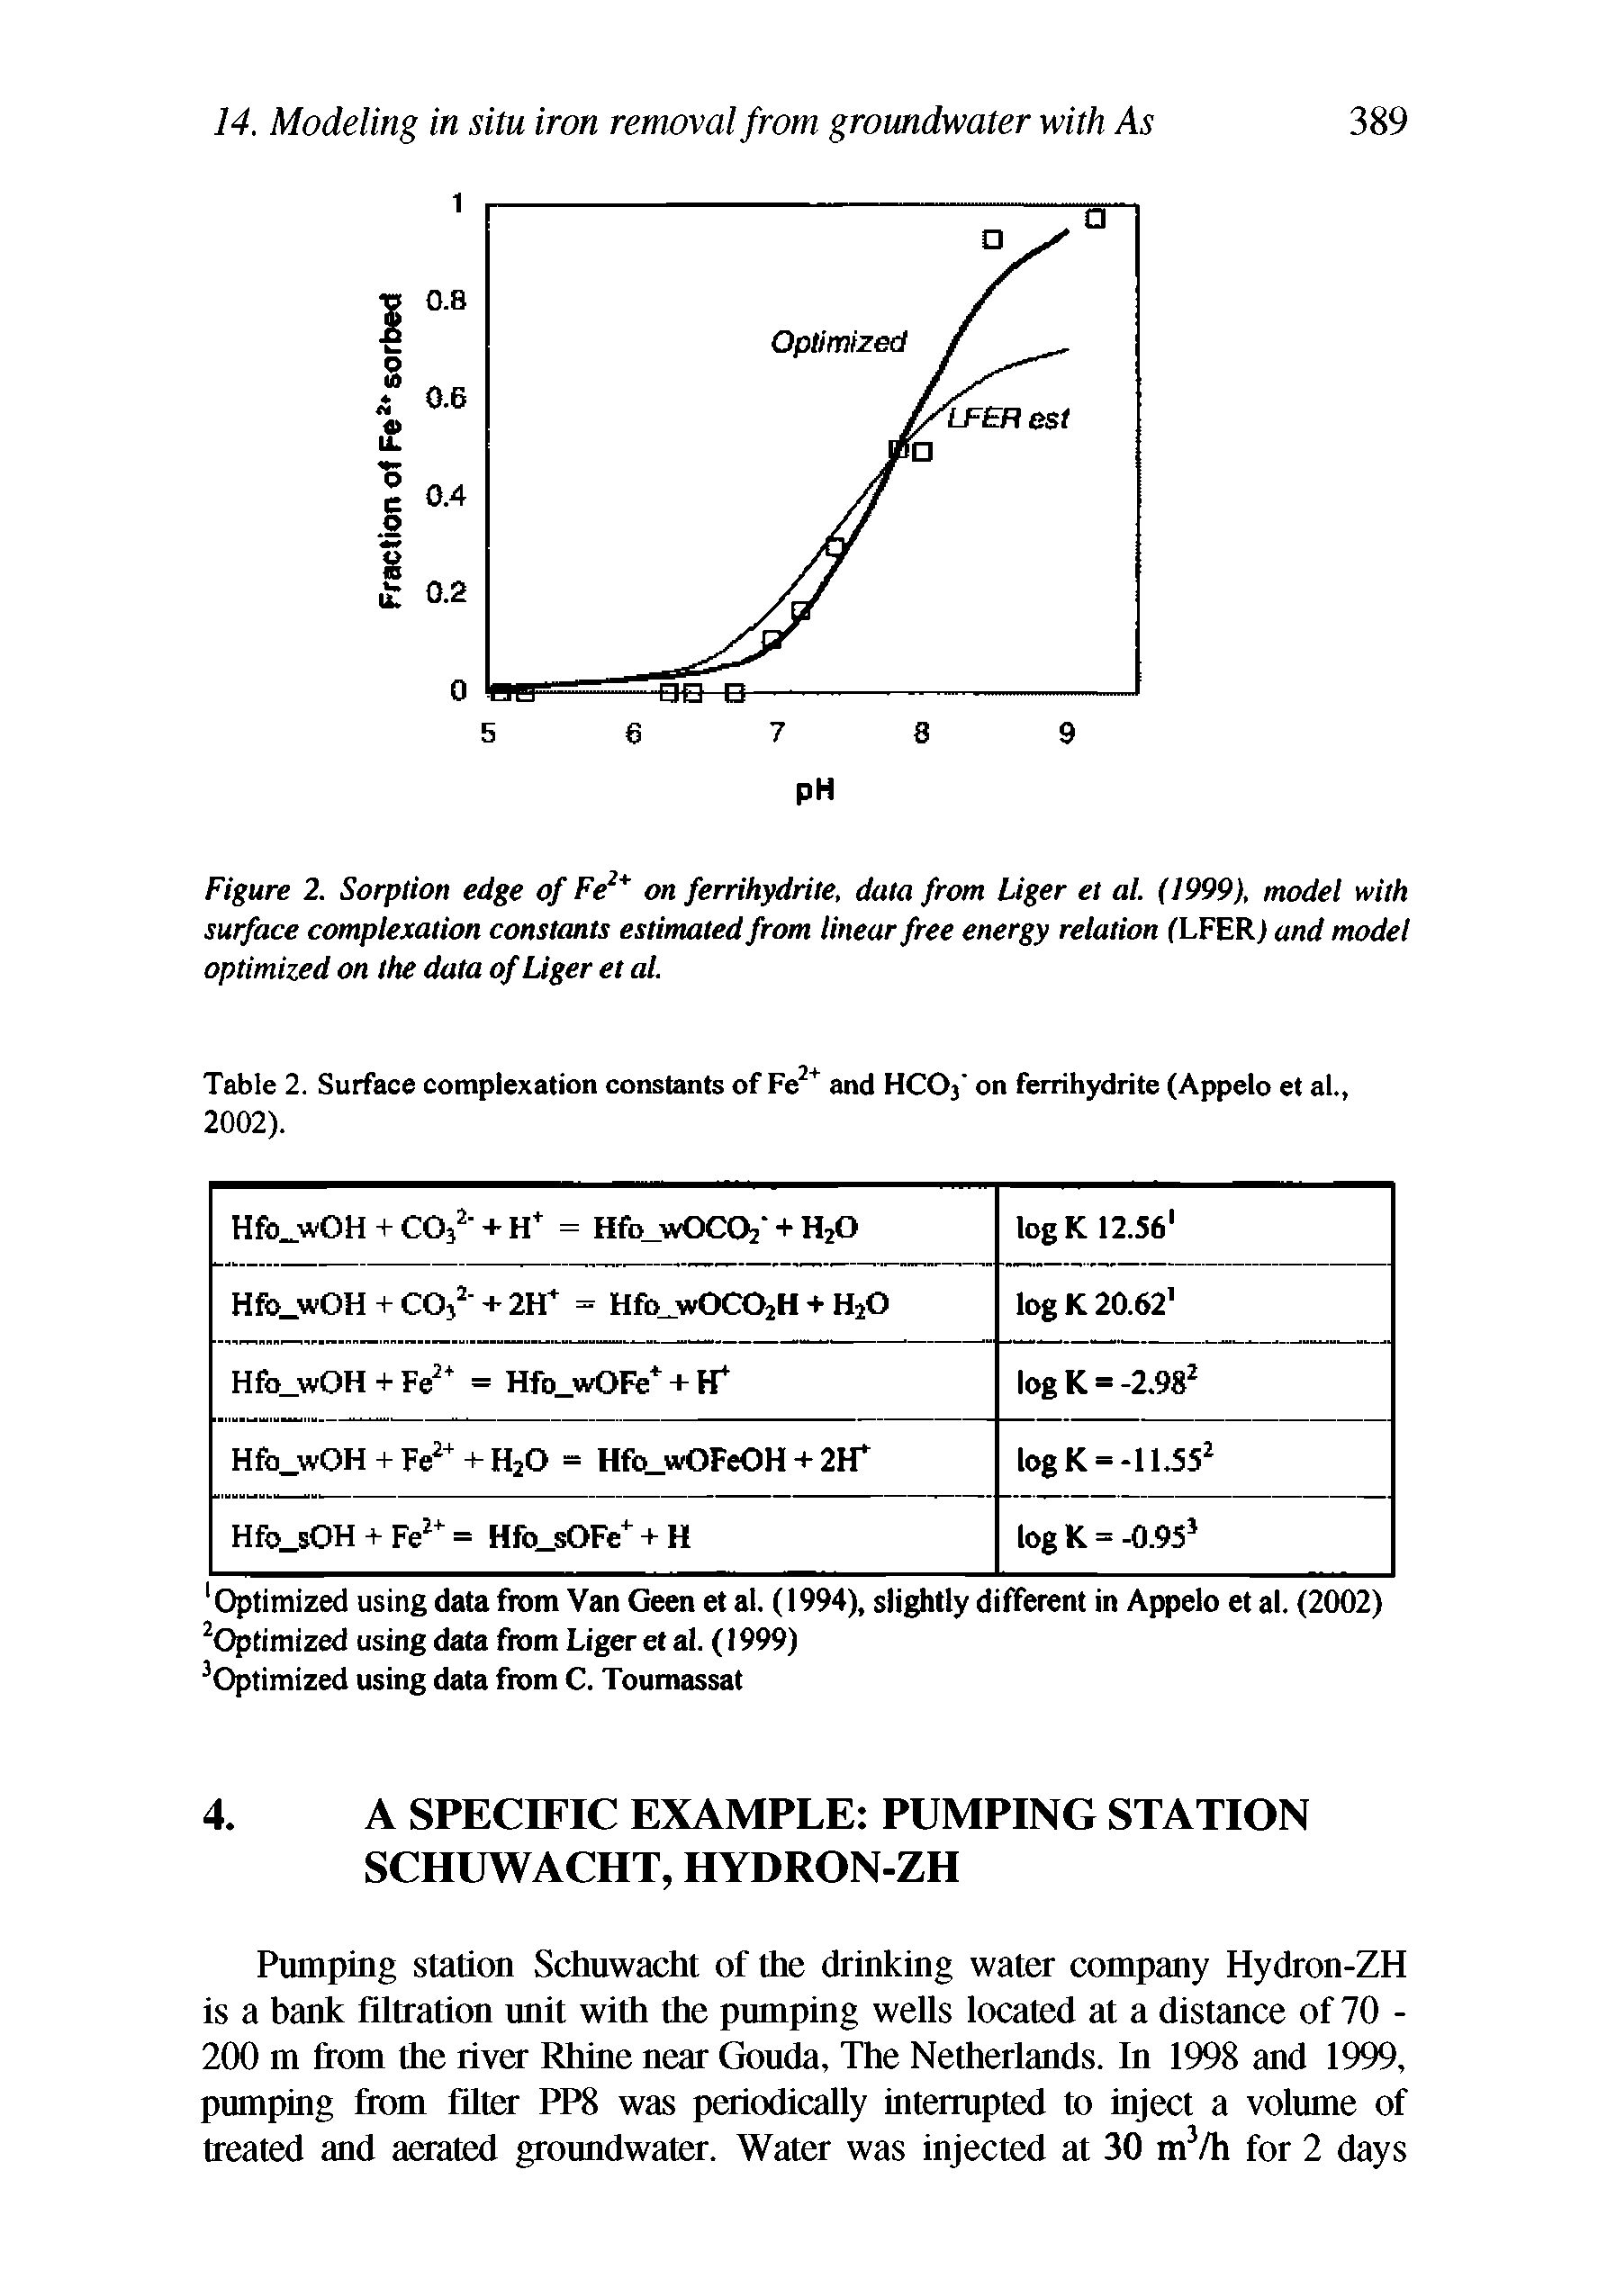 Table 2. Surface complexation constants of Fe and HC03 on ferrihydrite (Appelo et al., 2002).